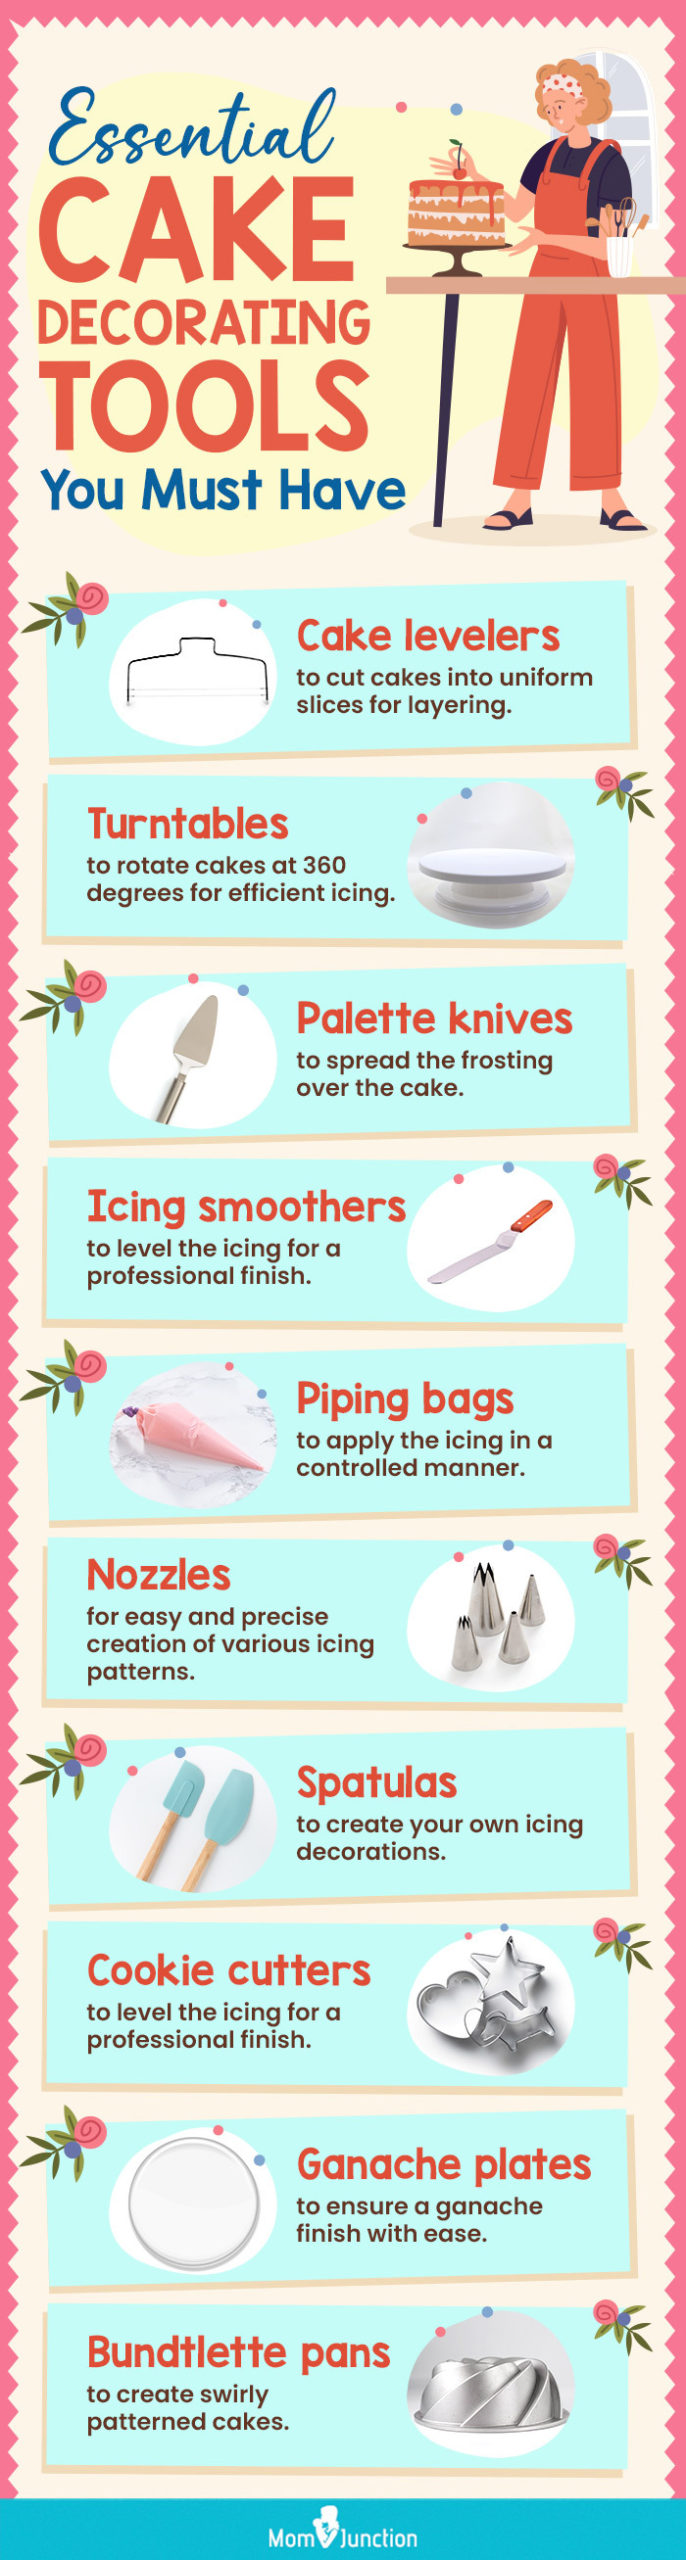 Essential Cake Decorating Tools You Must Have (infographic)